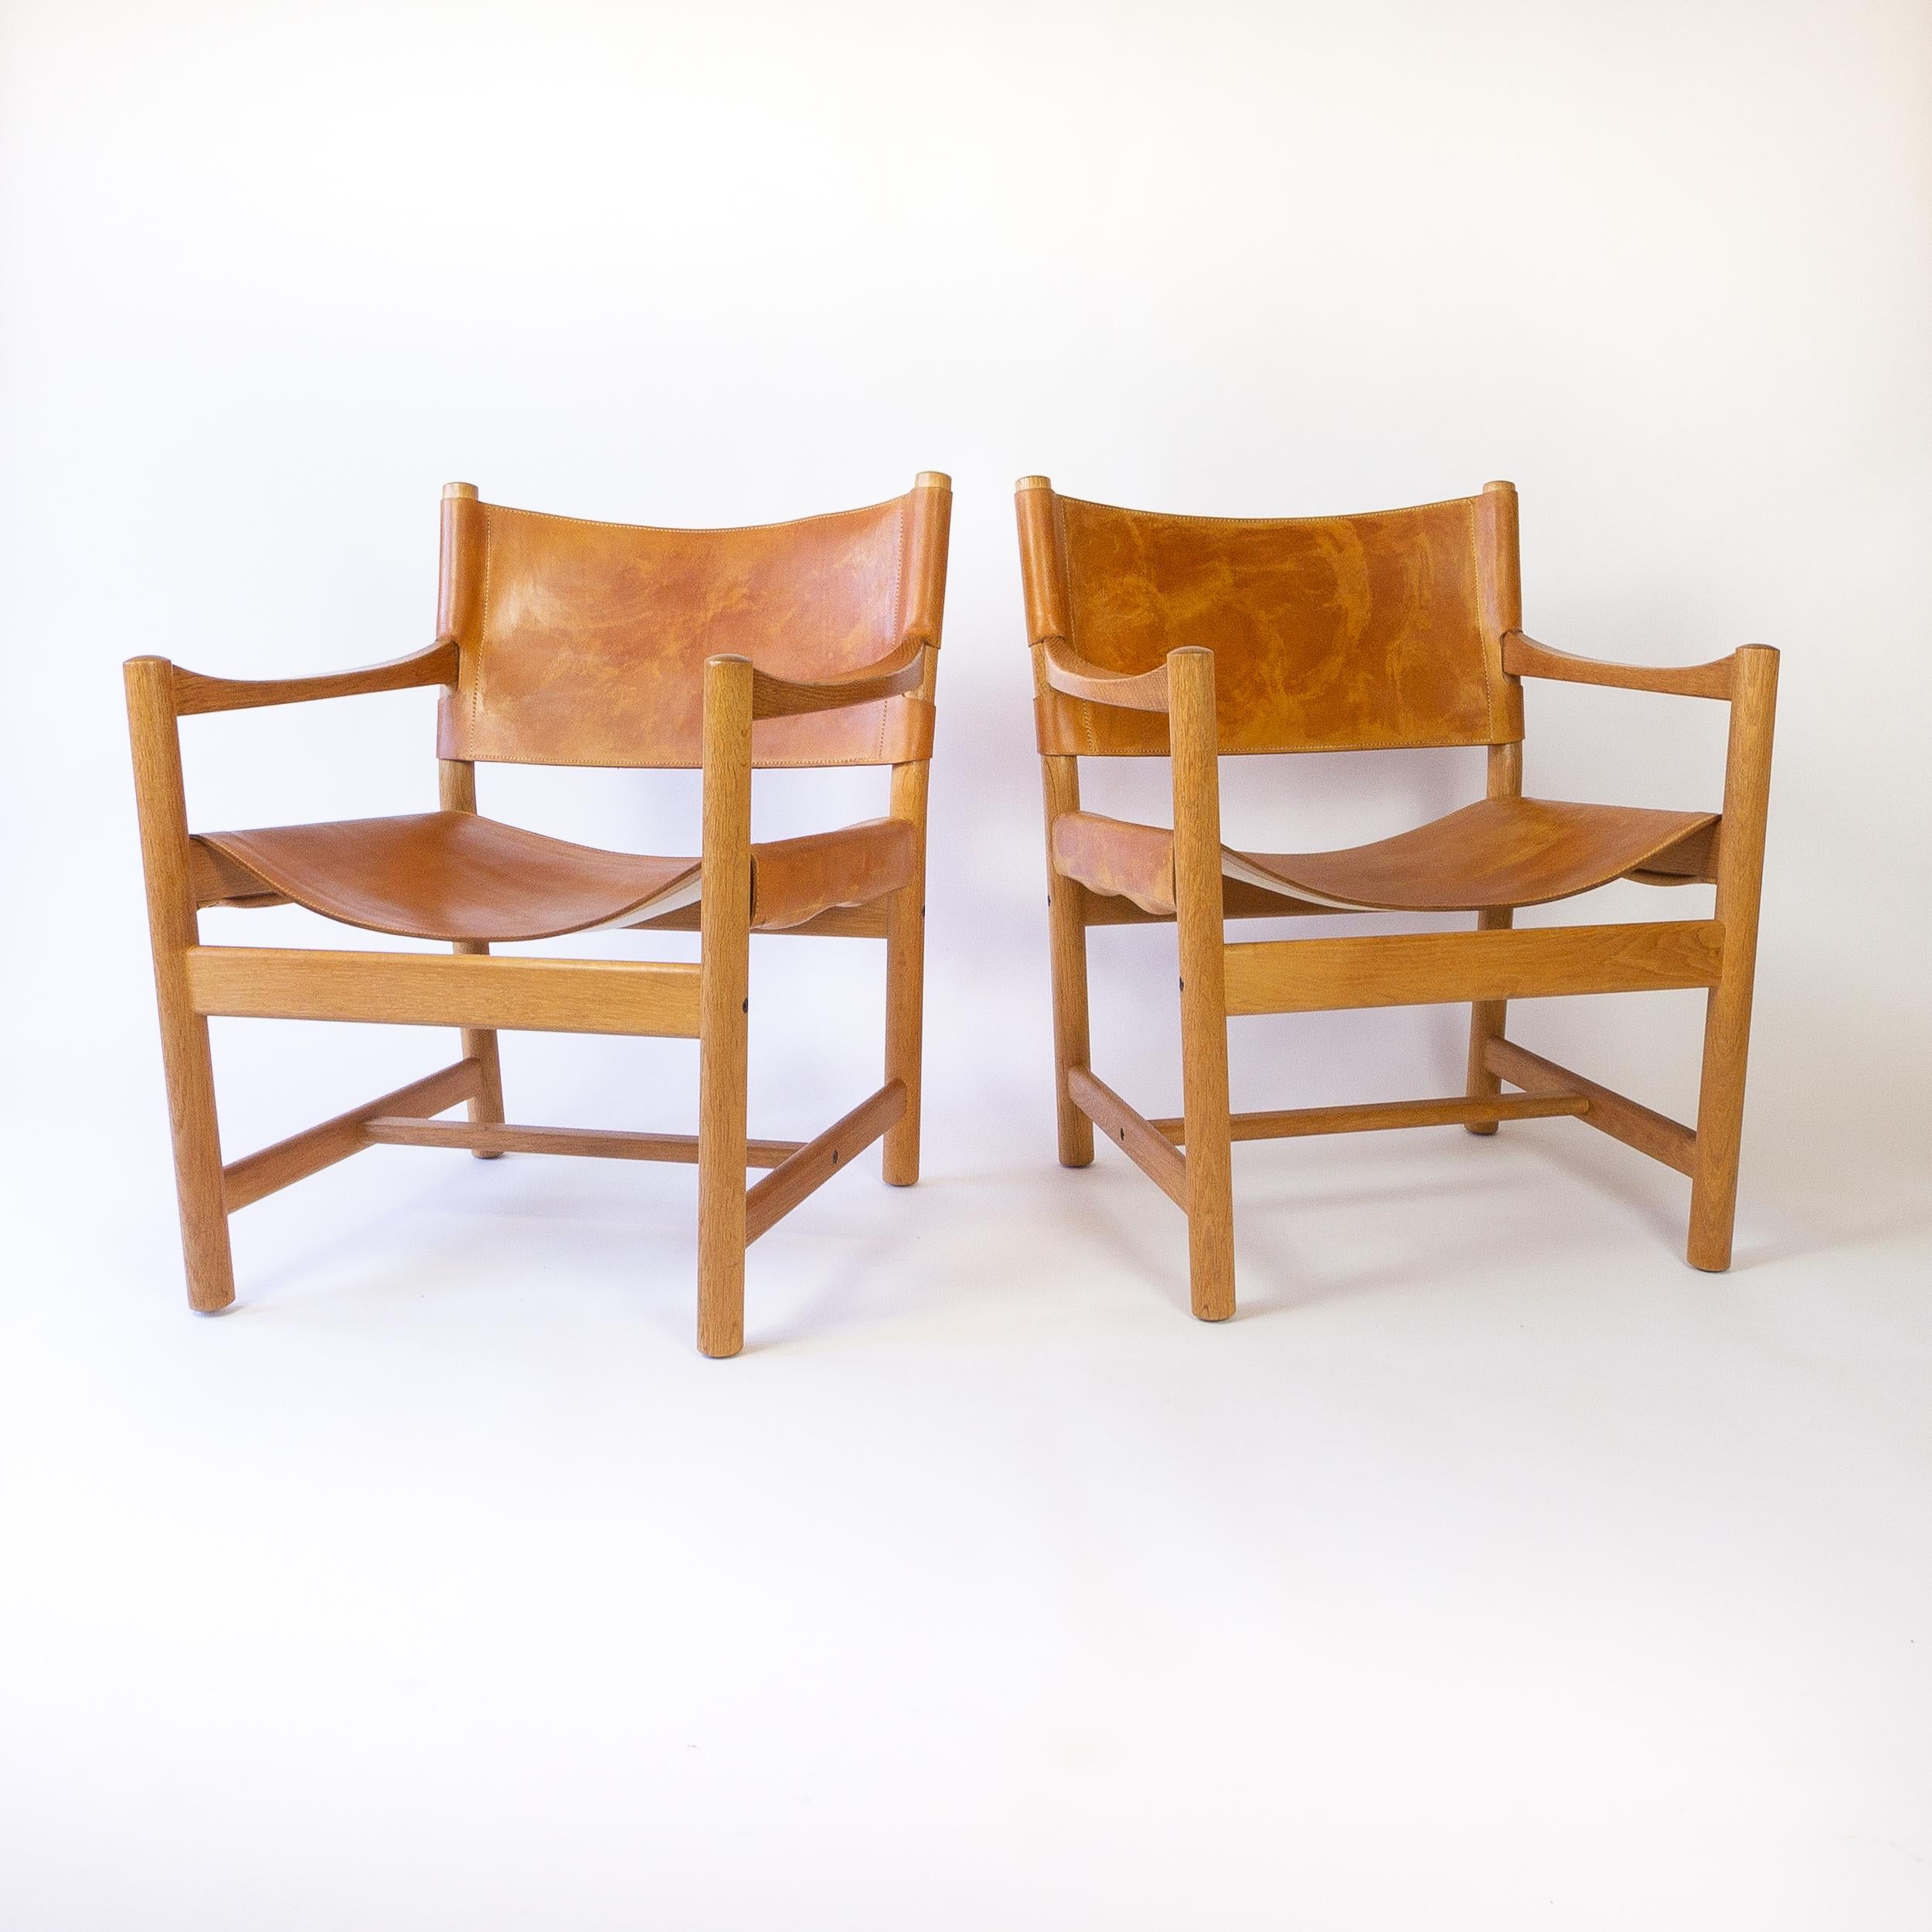 Pair of Cognac Leather and Oak Armchairs, Adrian & Ditte Heath for FDB, Denmark 1